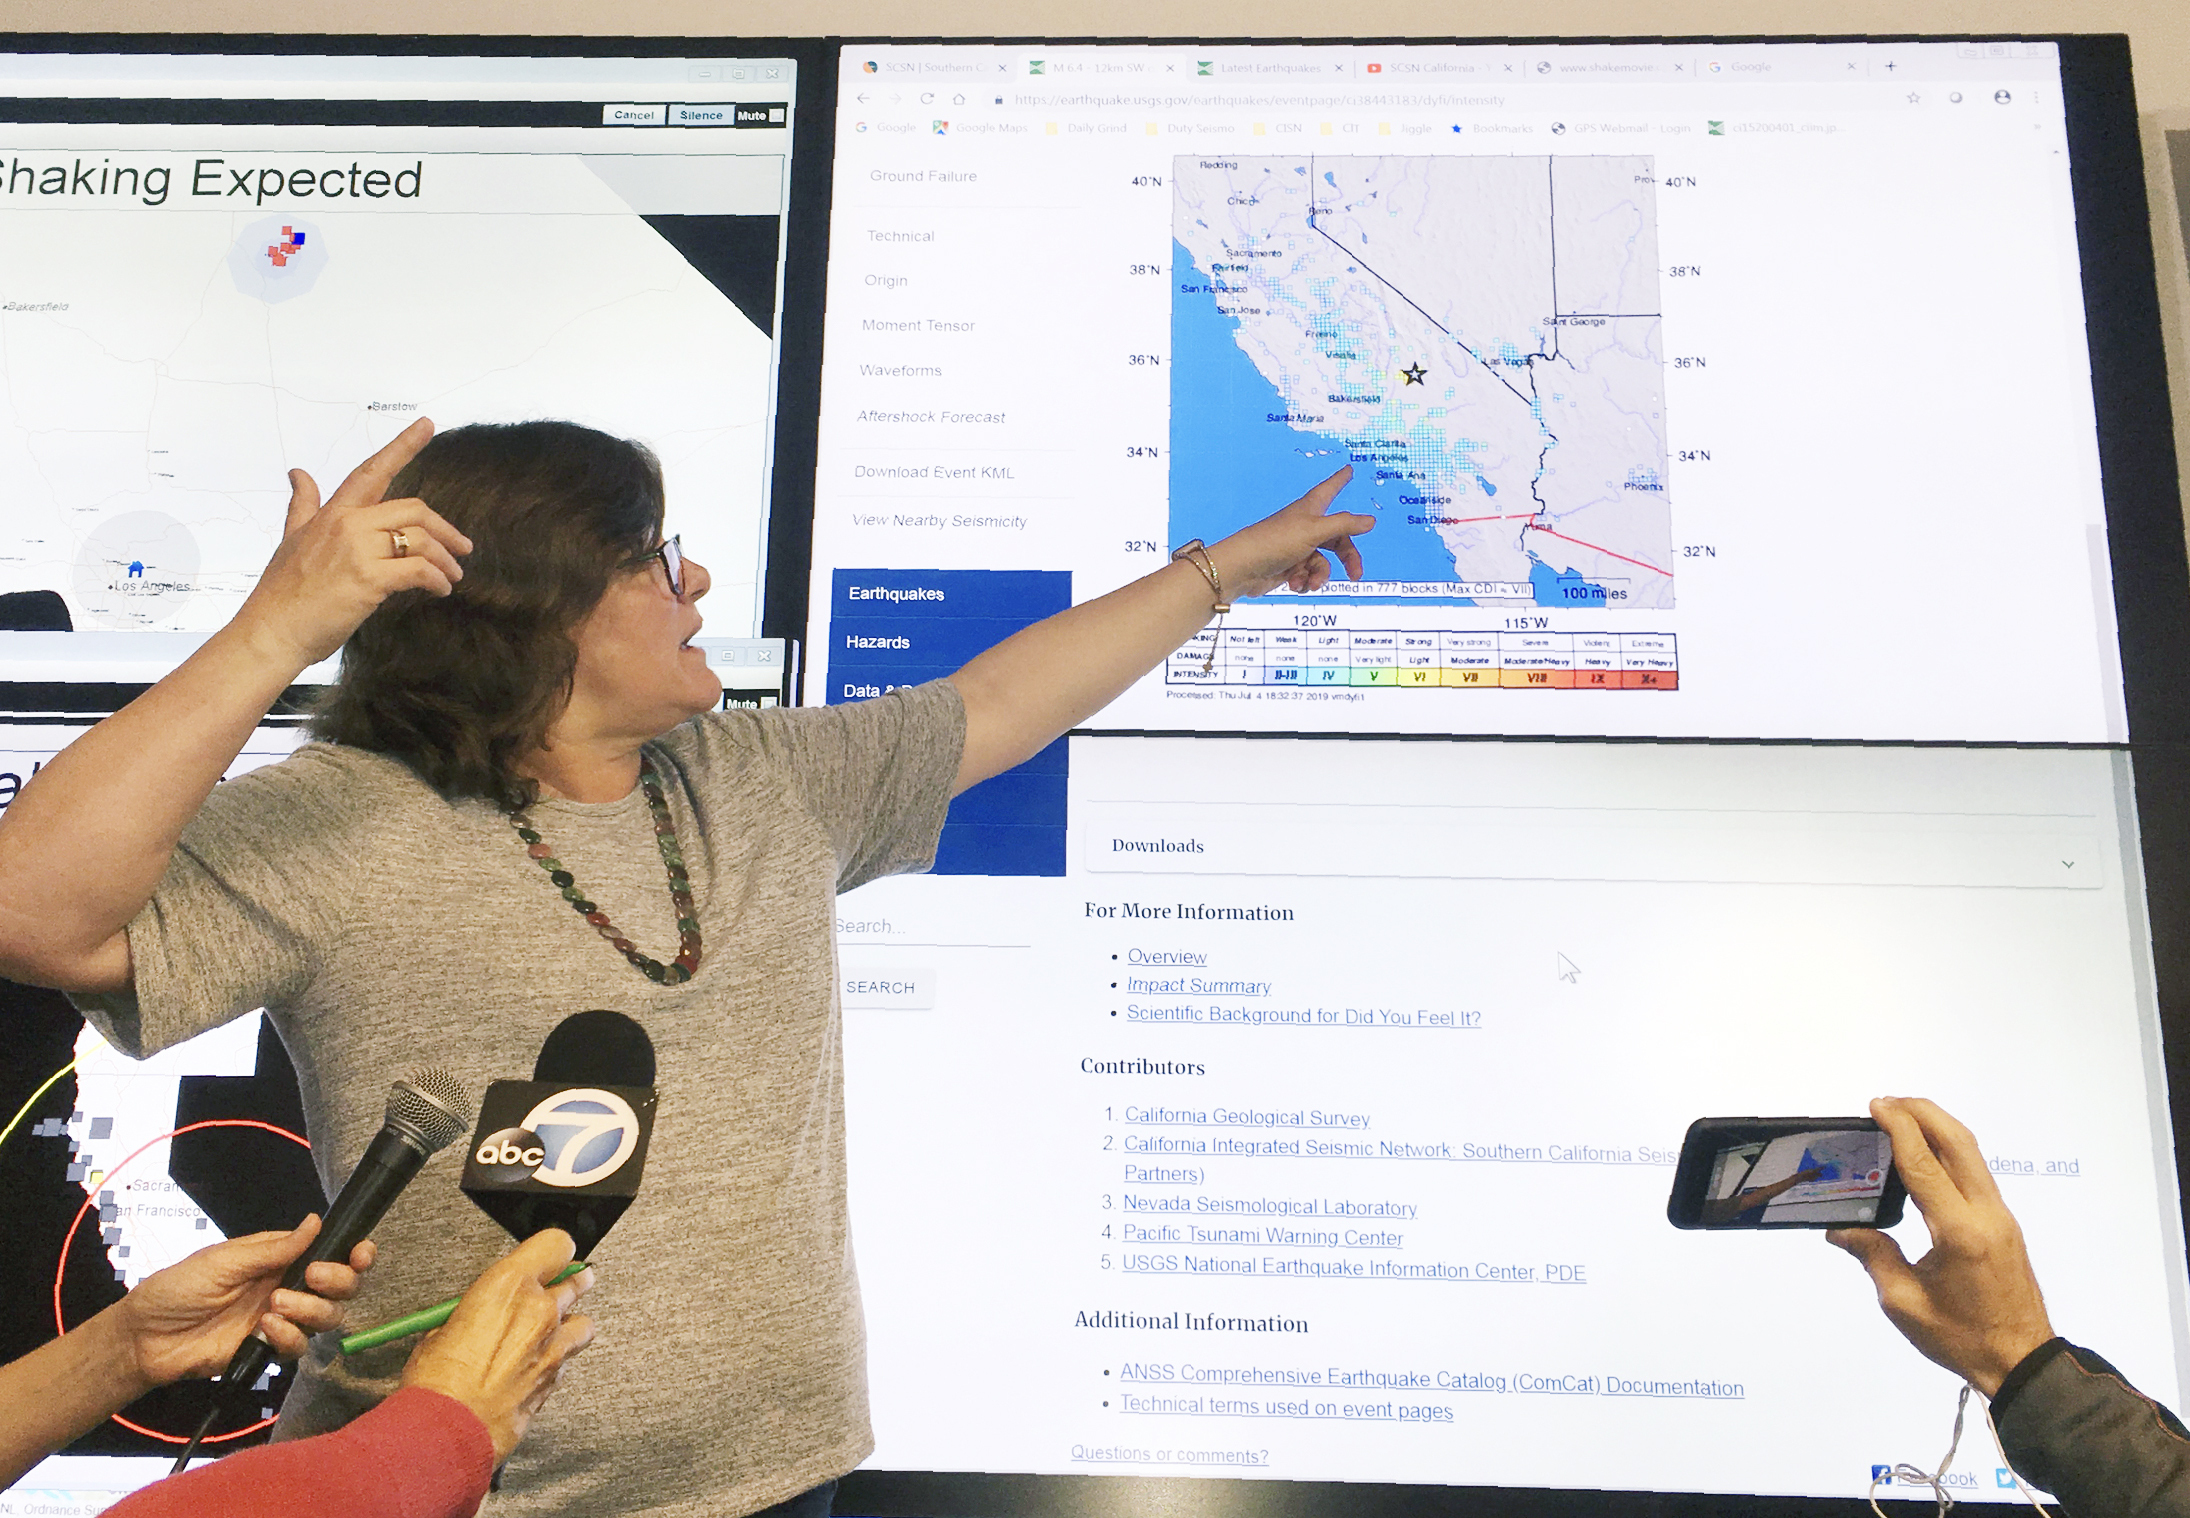 Seismologist Lucy Jones talks during a news conference at the Caltech Seismological Laboratory in Pasadena, Calif., Thursday, July 4, 2019. A strong earthquake rattled a large swath of Southern California and parts of Nevada on Thursday morning, making hanging lamps sway and photo frames on walls shake. There were no immediate reports of damage or injuries but a swarm of aftershocks were reported. (John Antczak—AP)